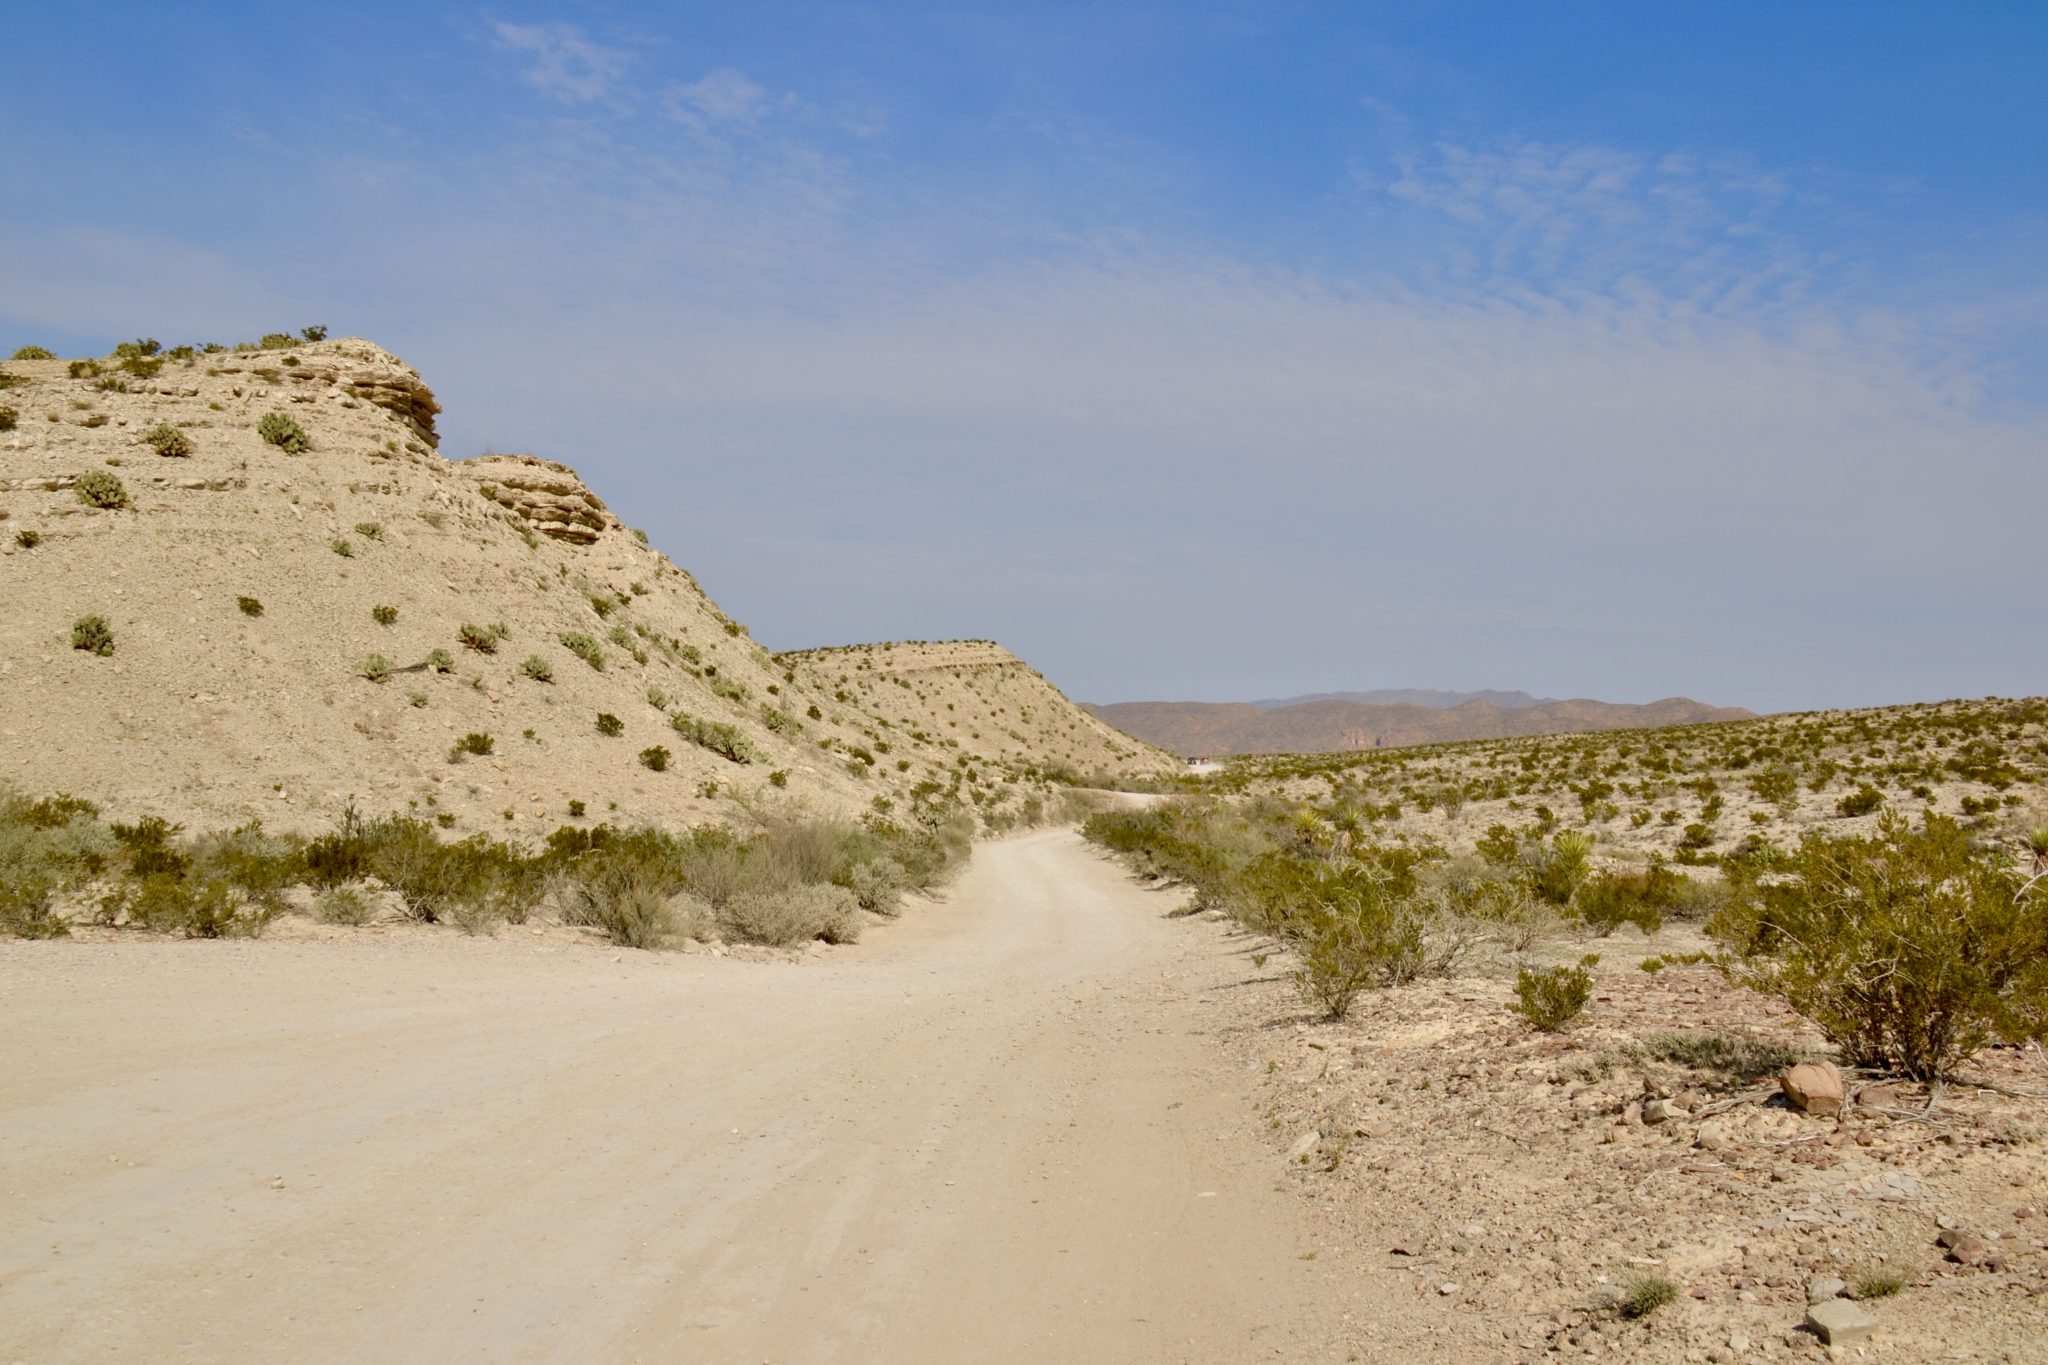 The road to Hot Springs in Big Bend National Park